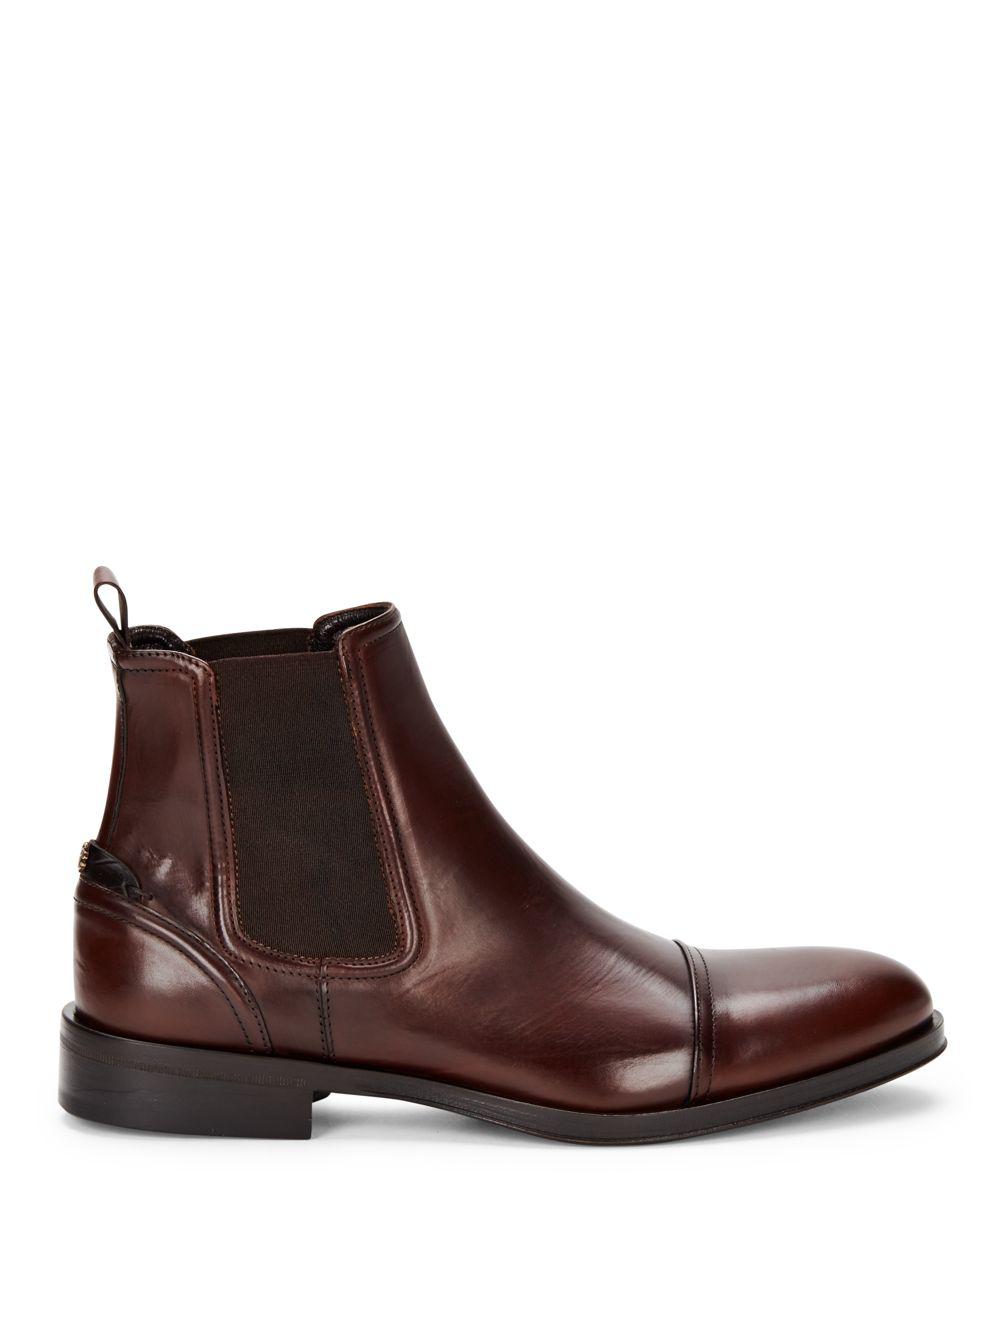 Roberto Cavalli Leather Chelsea Boots in Brown for Men - Lyst